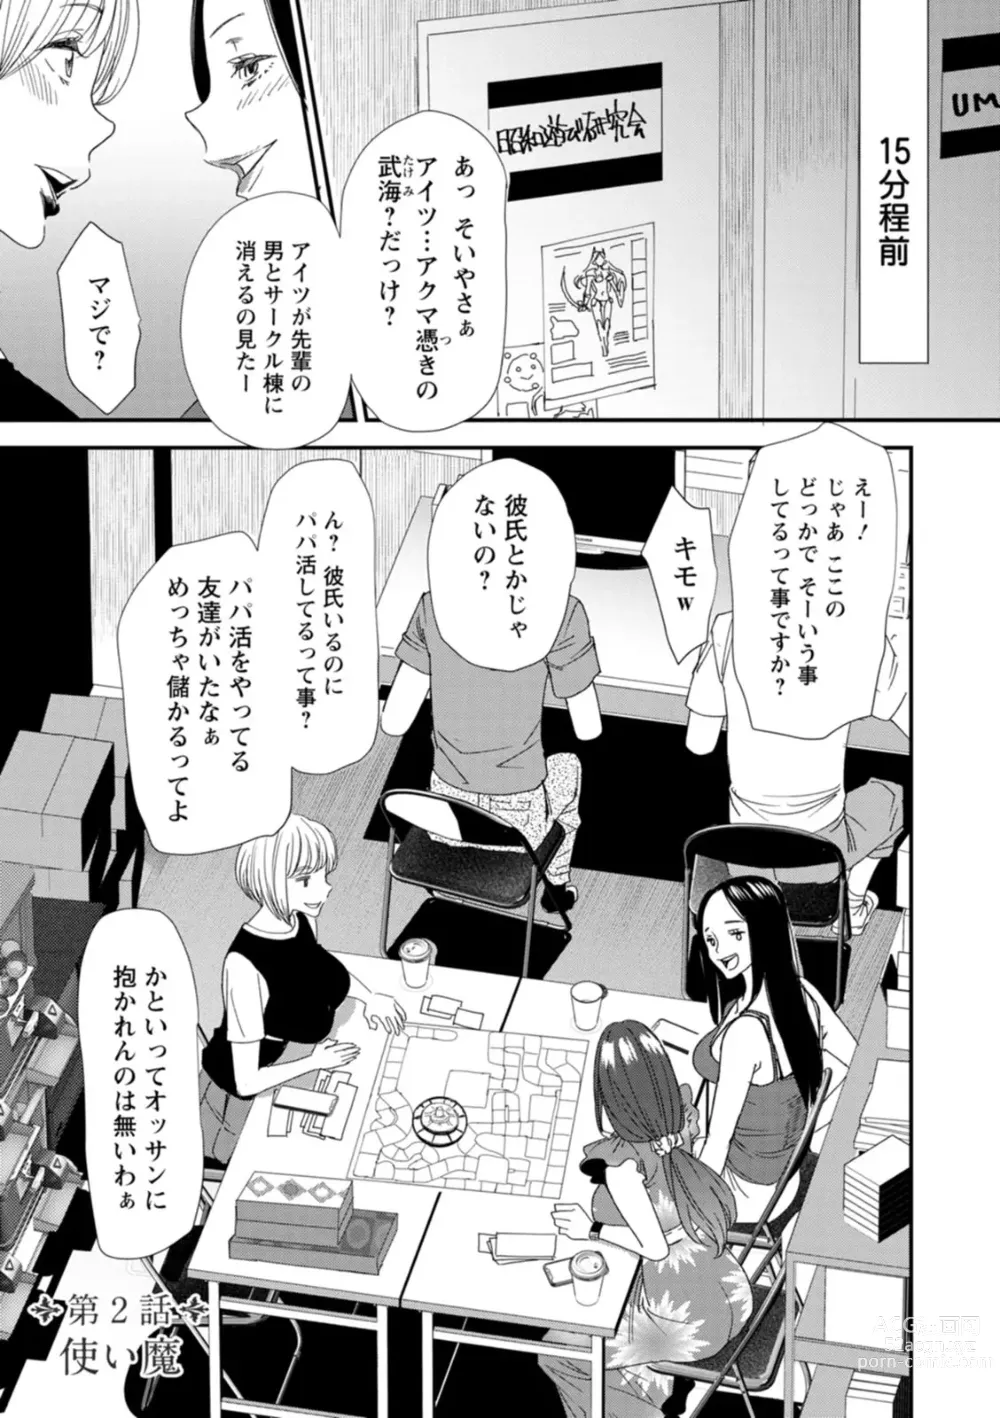 Page 23 of manga Inma Joshi Daisei no Yuuutsu - The Melancholy of the Succubus who is a college student